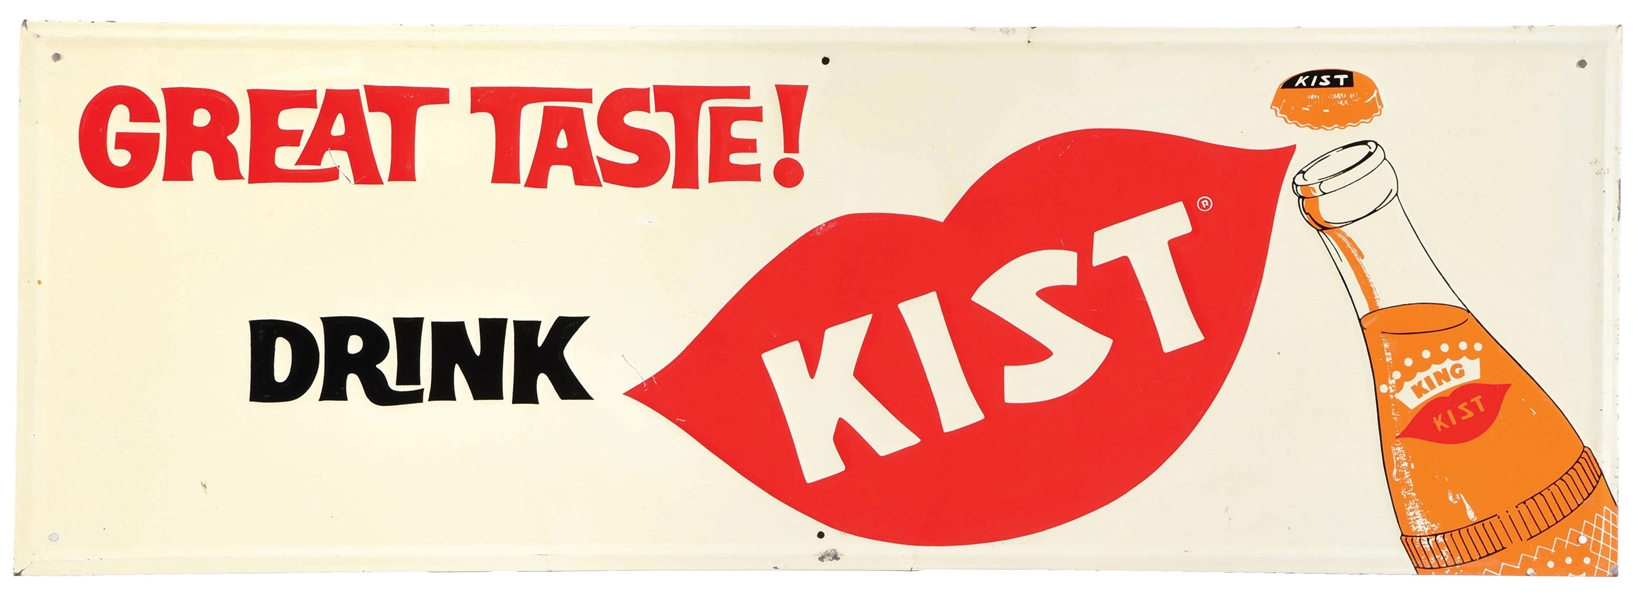 DRINK KIST SELF-FRAMED EMBOSSED TIN SIGN W/ LIPS AND BOTTLE GRAPHIC.